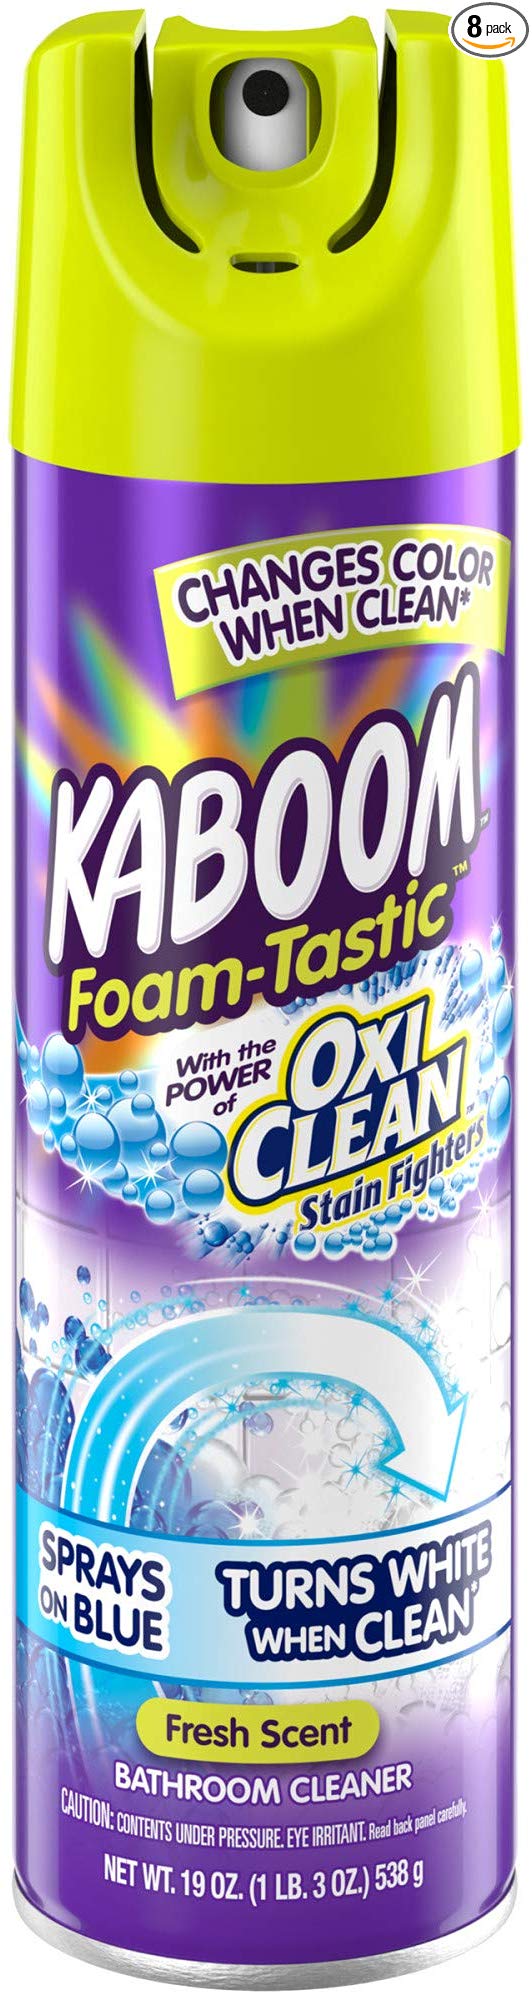 Kaboom Foam-Tastic with Oxiclean Fresh, 19 Ounce (Pack of 8)